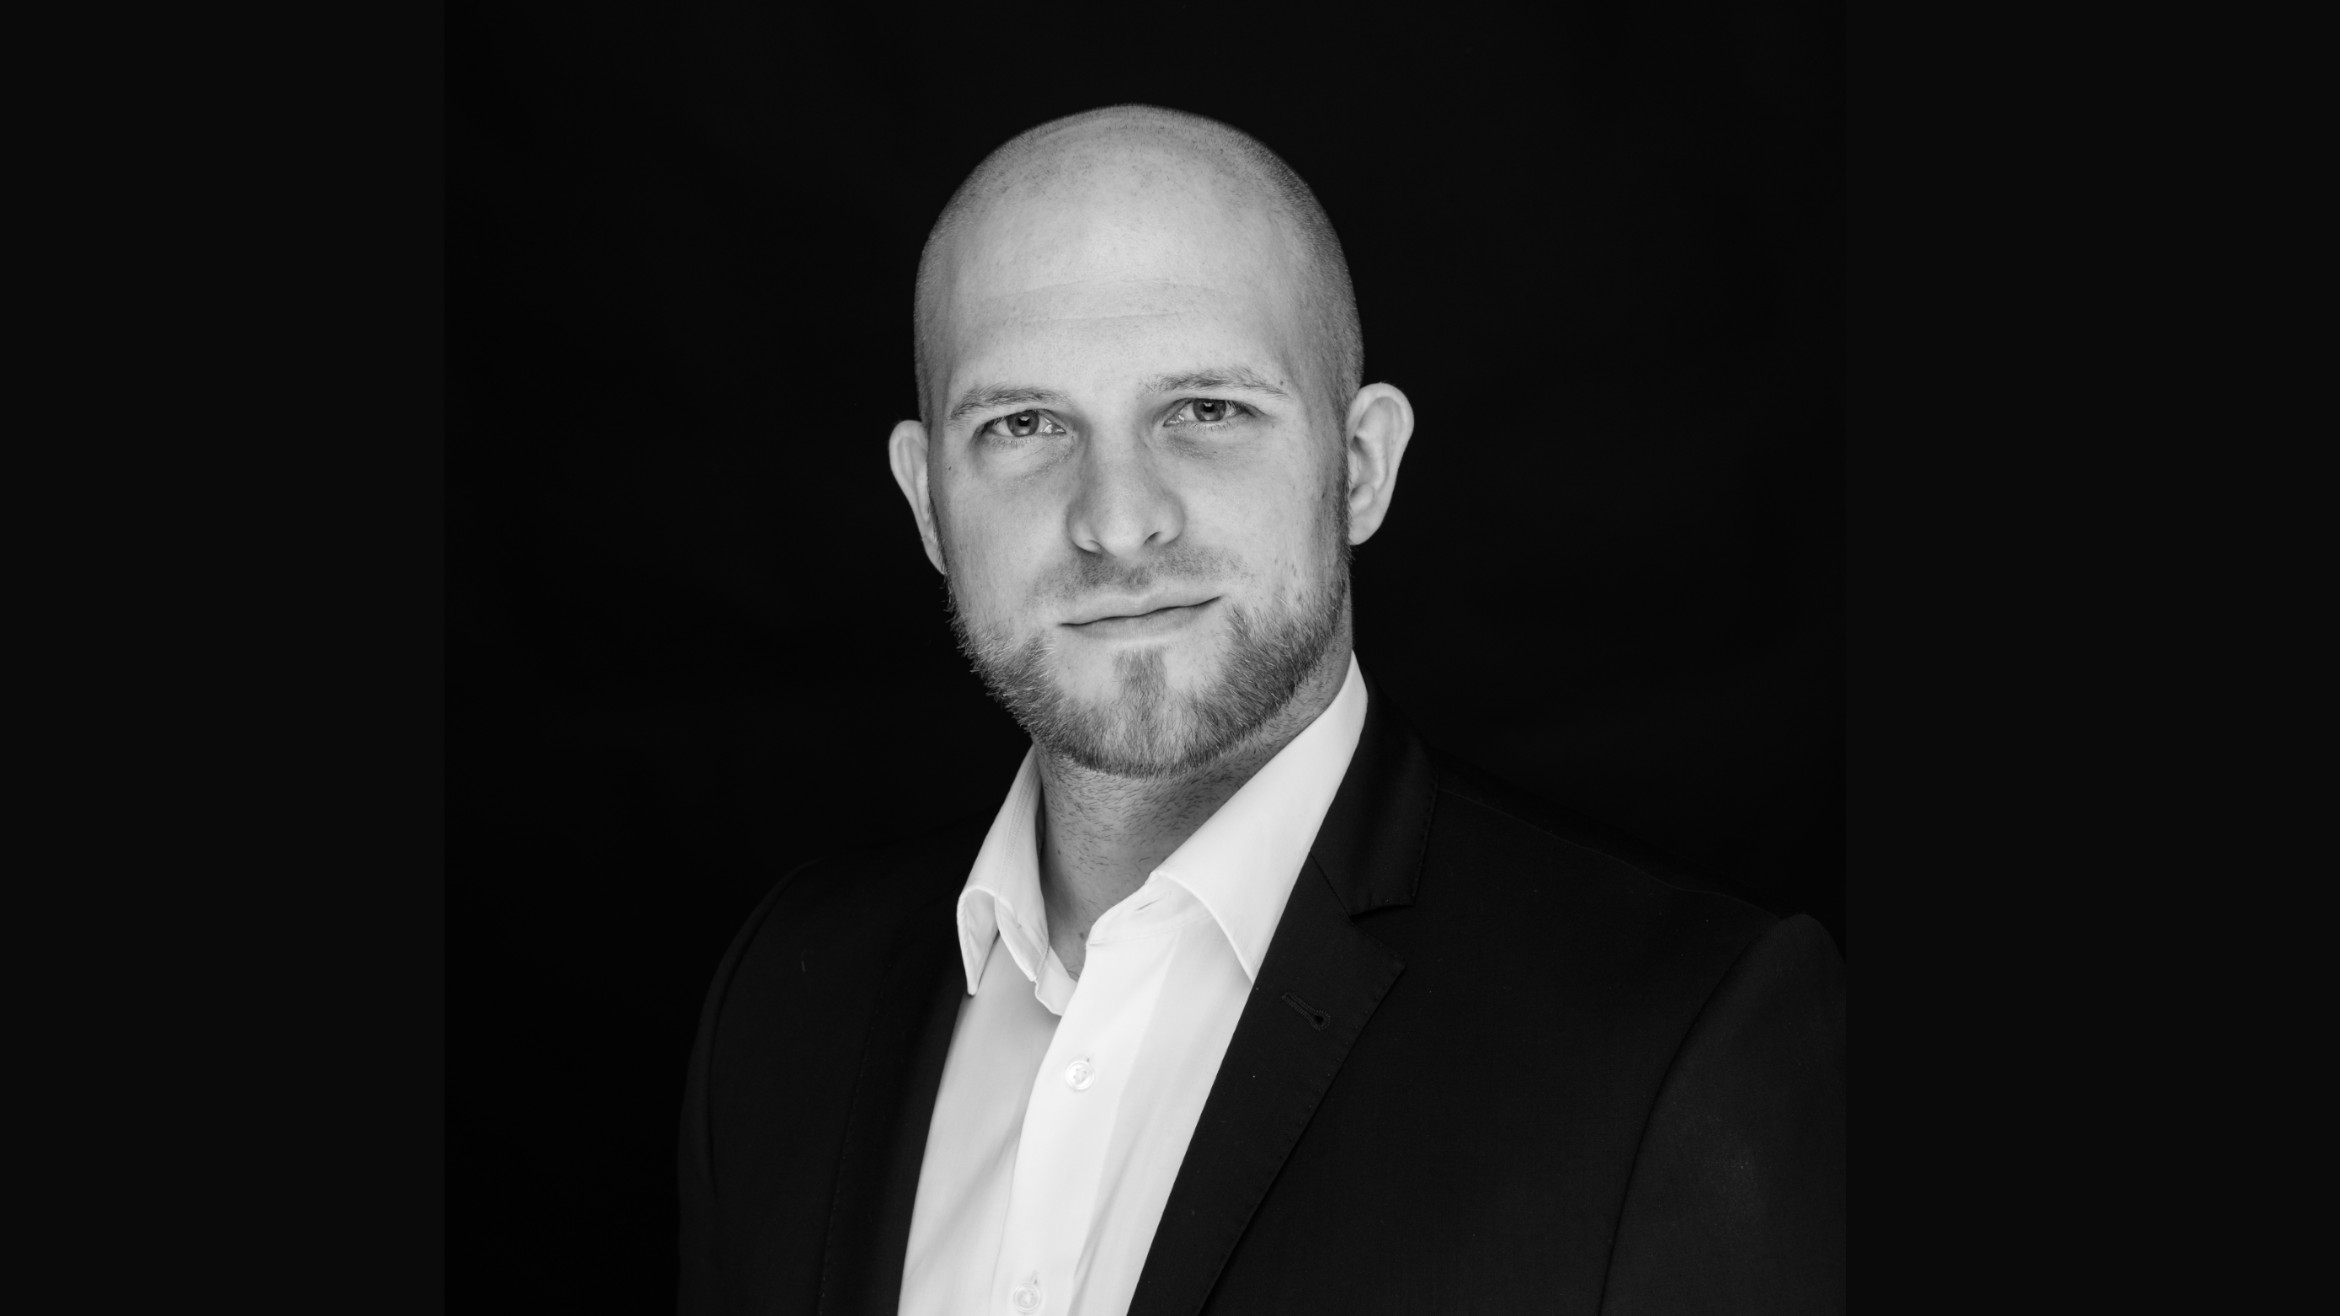 Christopher Reher, 36, ist ab sofort Director Data Strategy & Products bei Media Impact. 